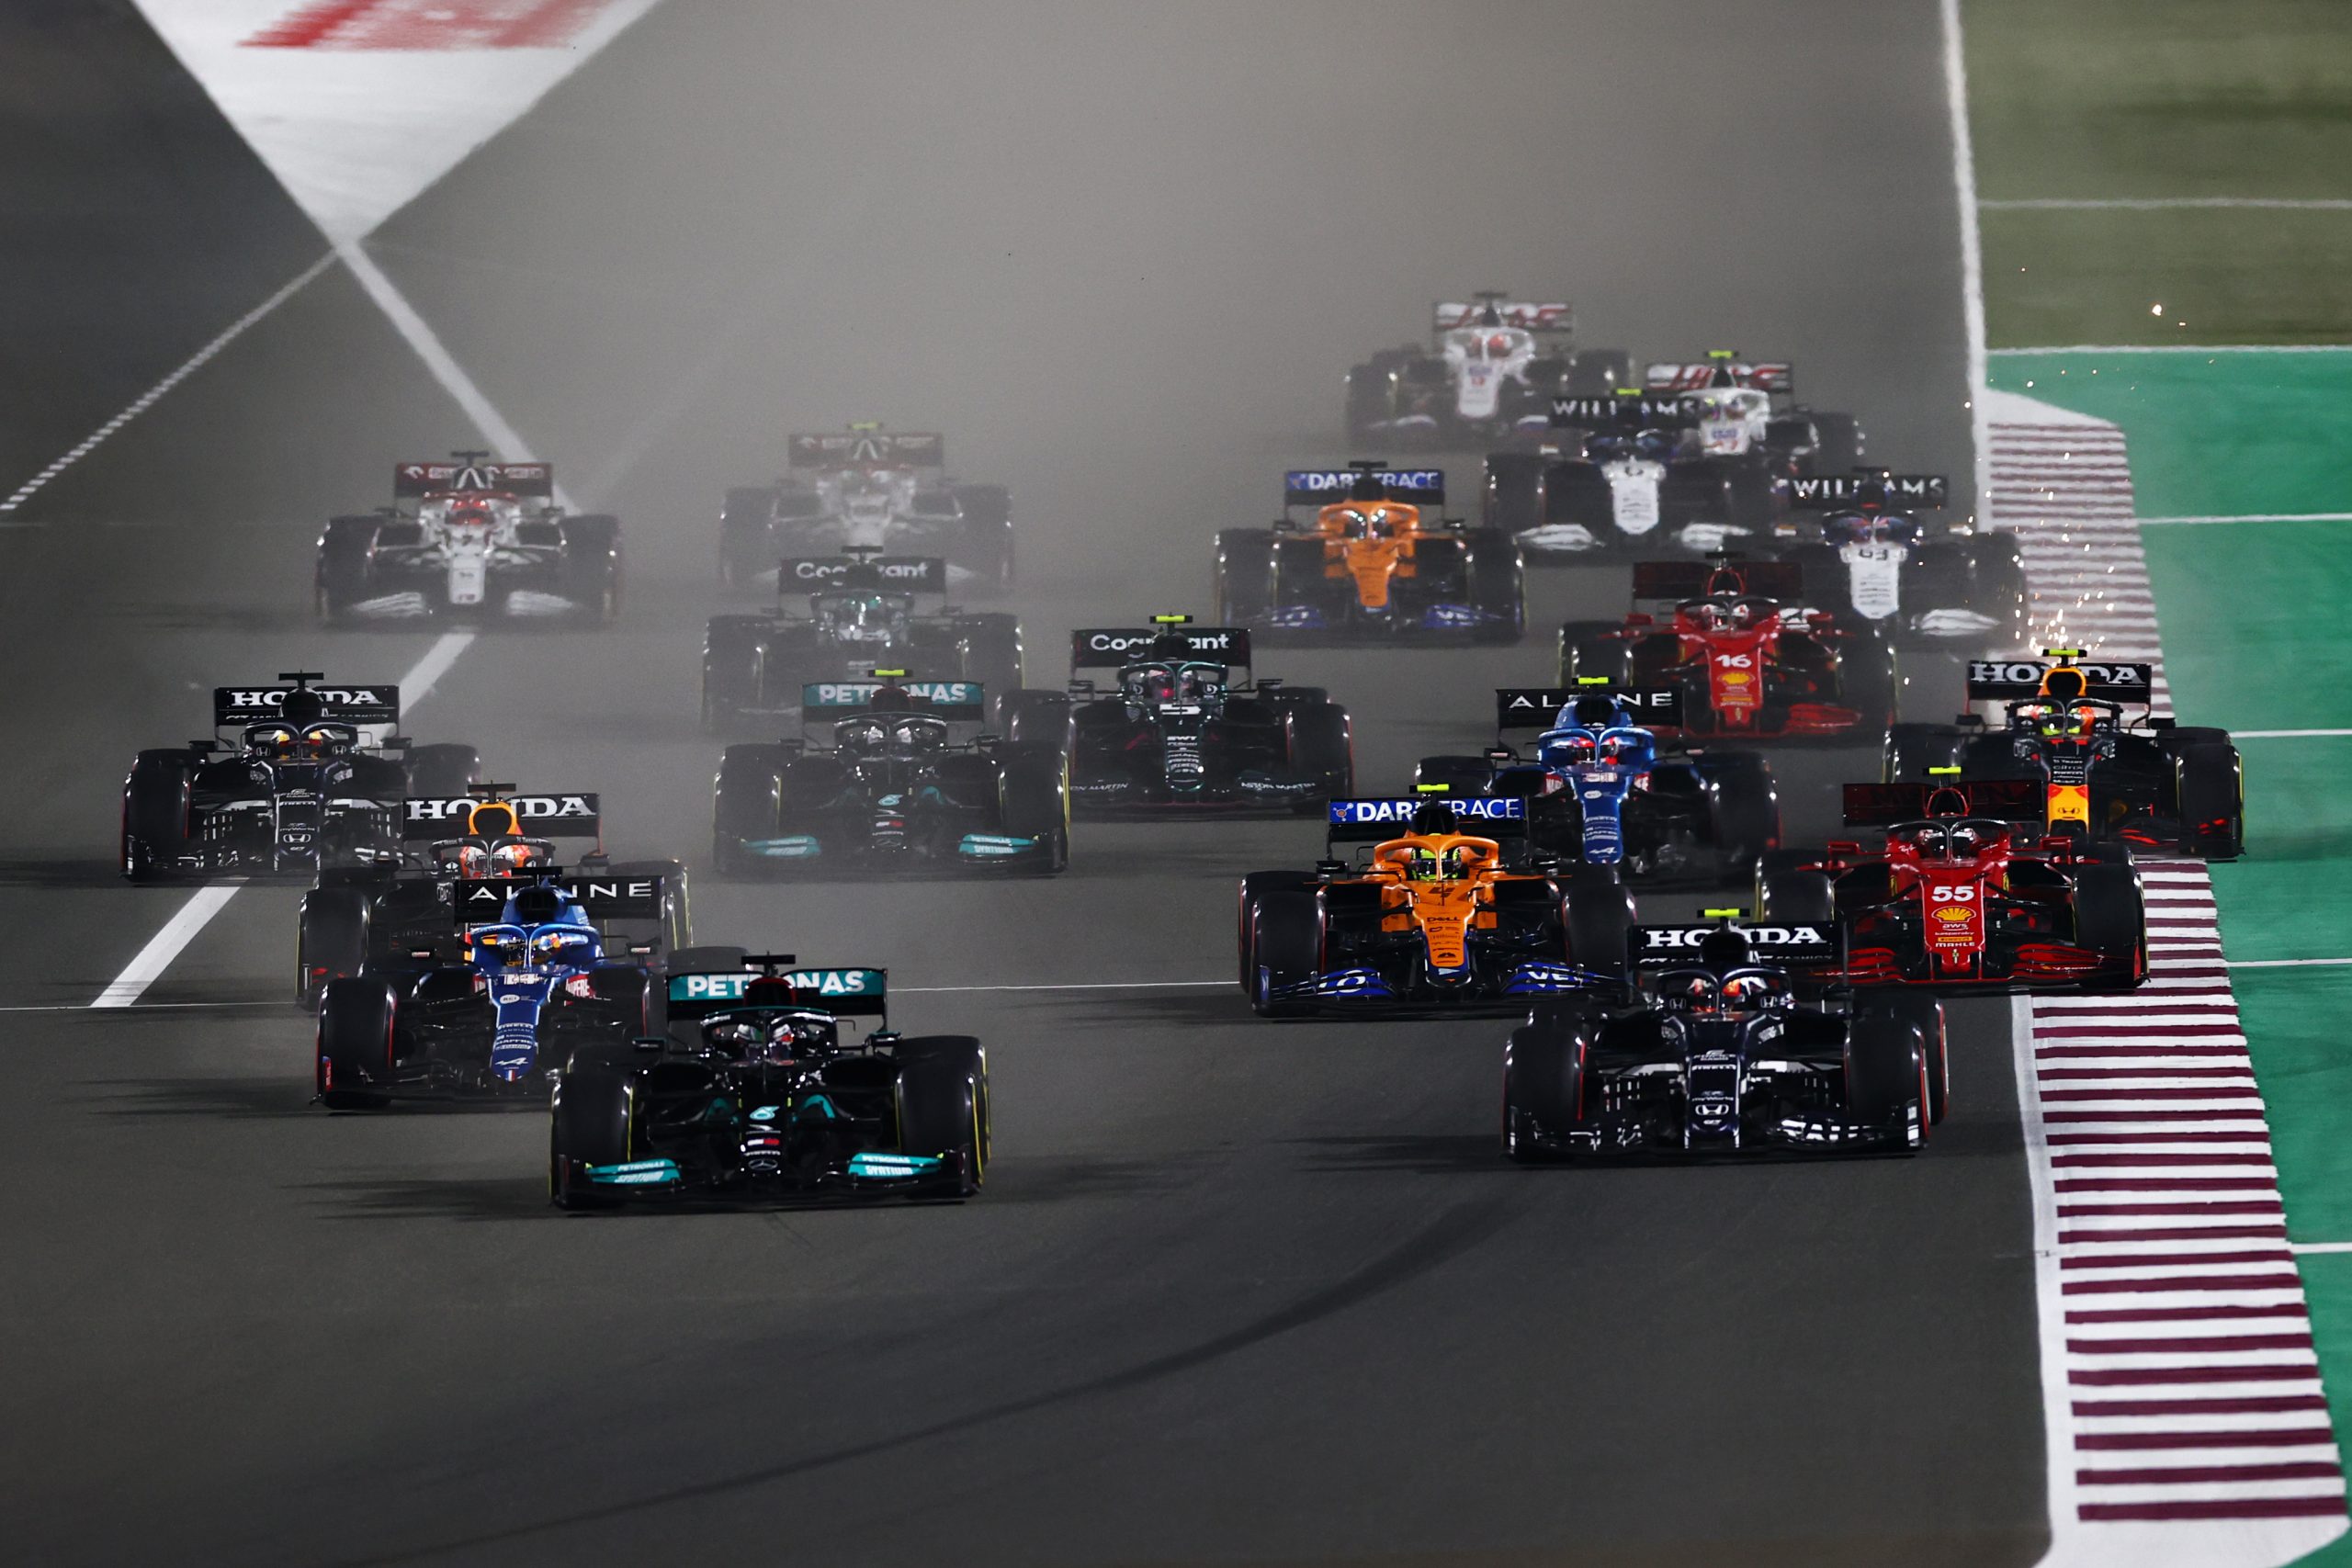 Lewis Hamilton’s Dominant Win in Qatar Narrows the Points Gap to Max Verstappen. Here’s What the Championship Picture Looks Like With Two Races Left